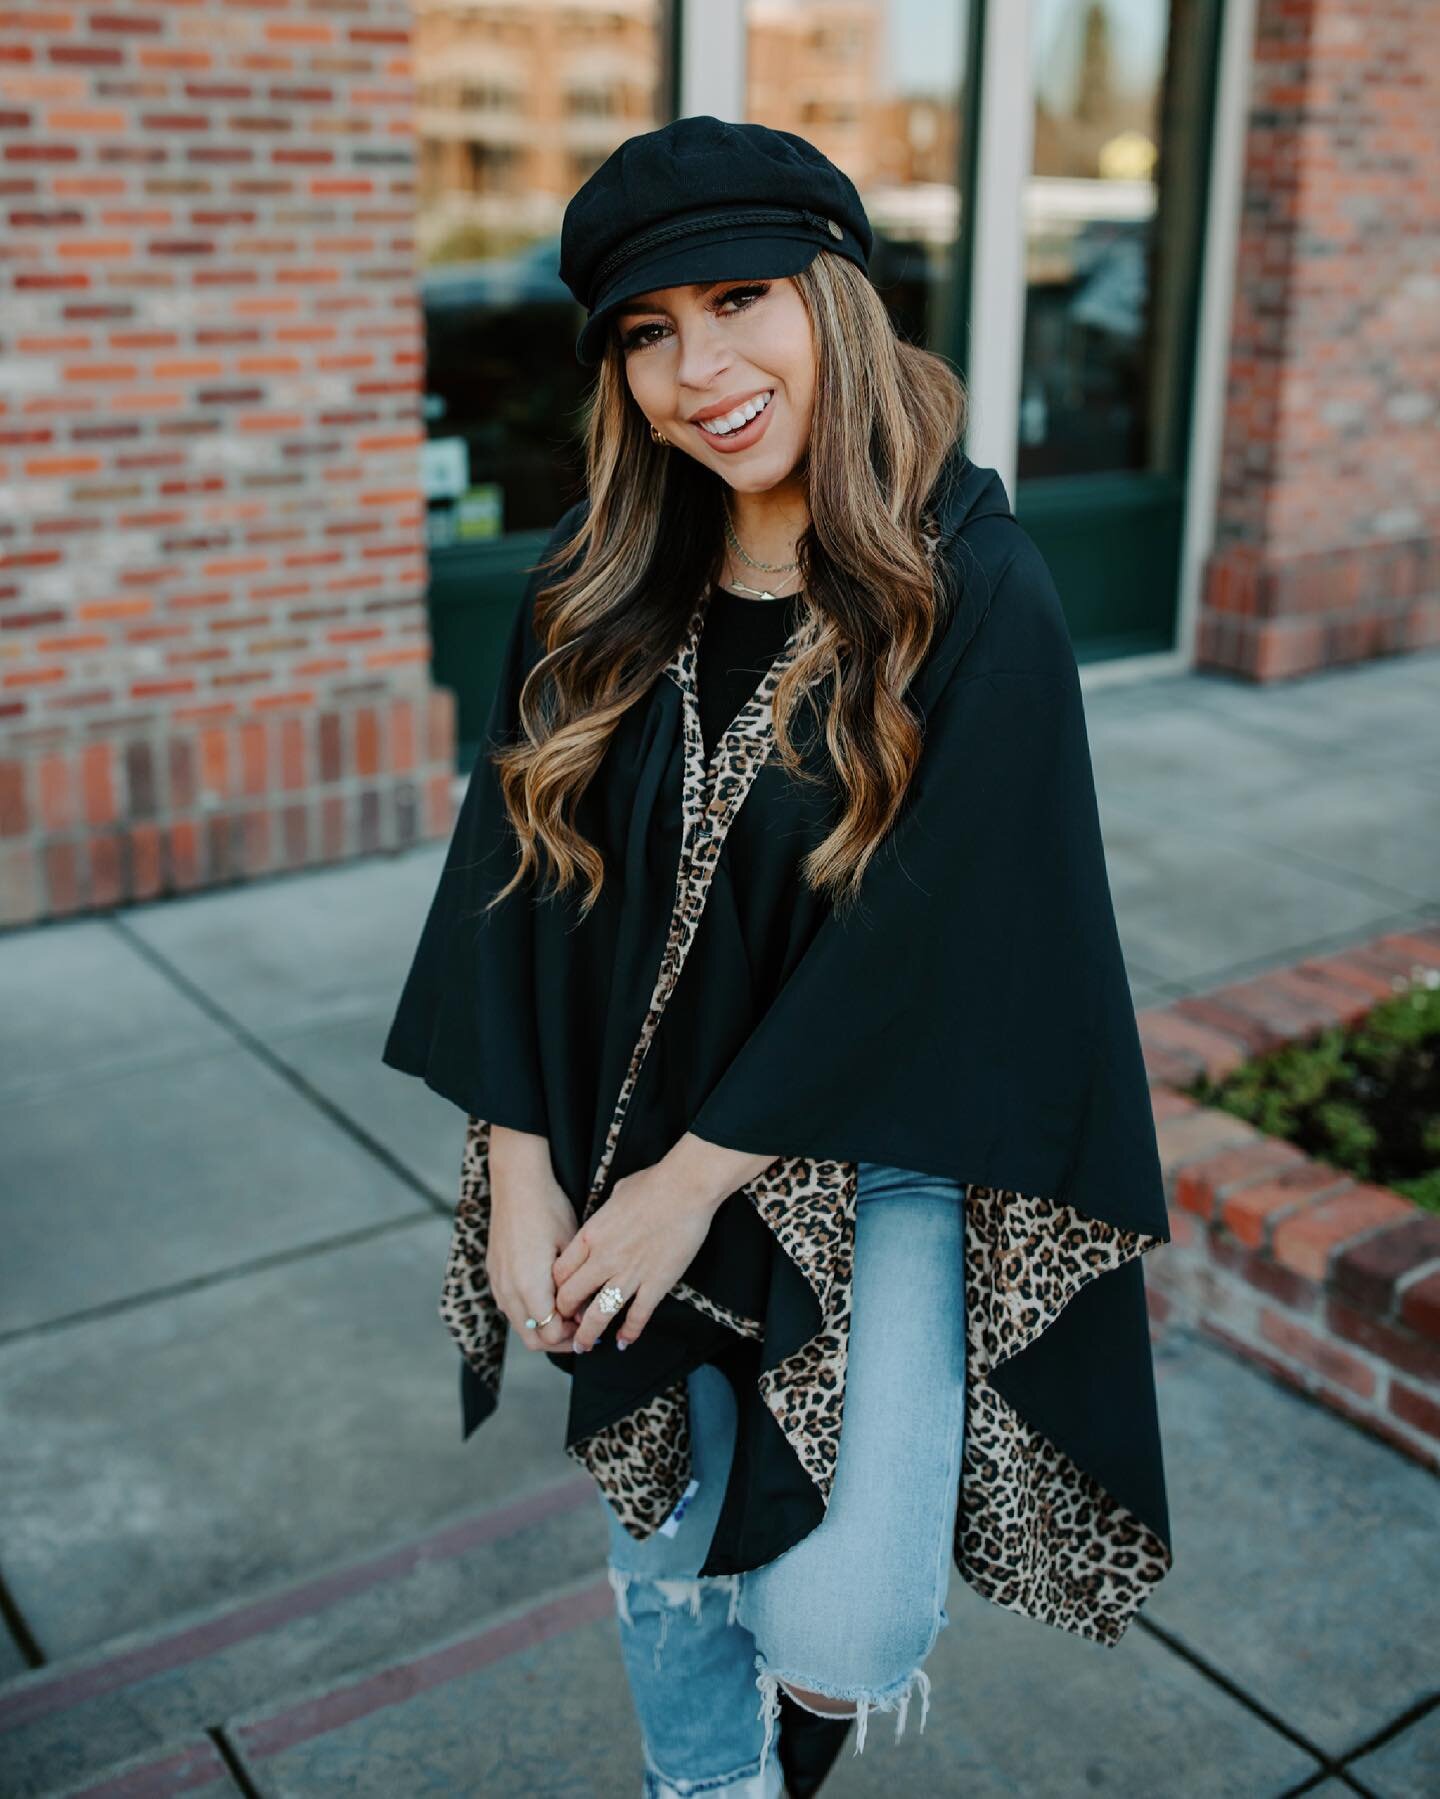 ✨TWO WINNERS!!✨ If you missed it, I shared the cutest lightweight, reversible wraps by @rainraps&nbsp;in stories yesterday. The perfect accessory to rock this spring! They're also water repellent, have a&nbsp;hood, and come with a convenient travel p